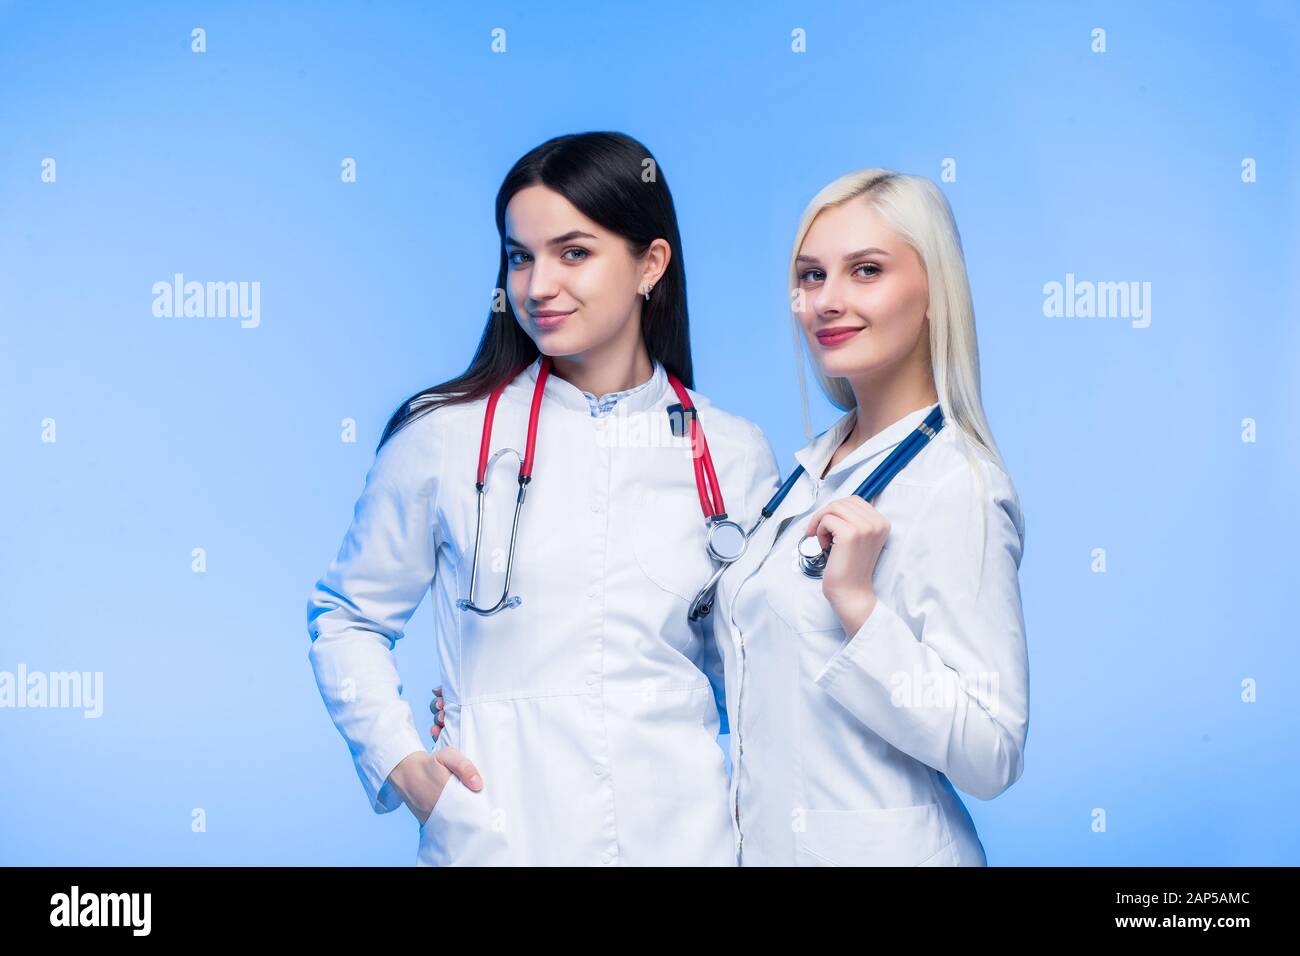 A team of young residents. Doctor, nurse and surgeon in blue background. A group of medical students of different nationalities are looking in the cel Stock Photo